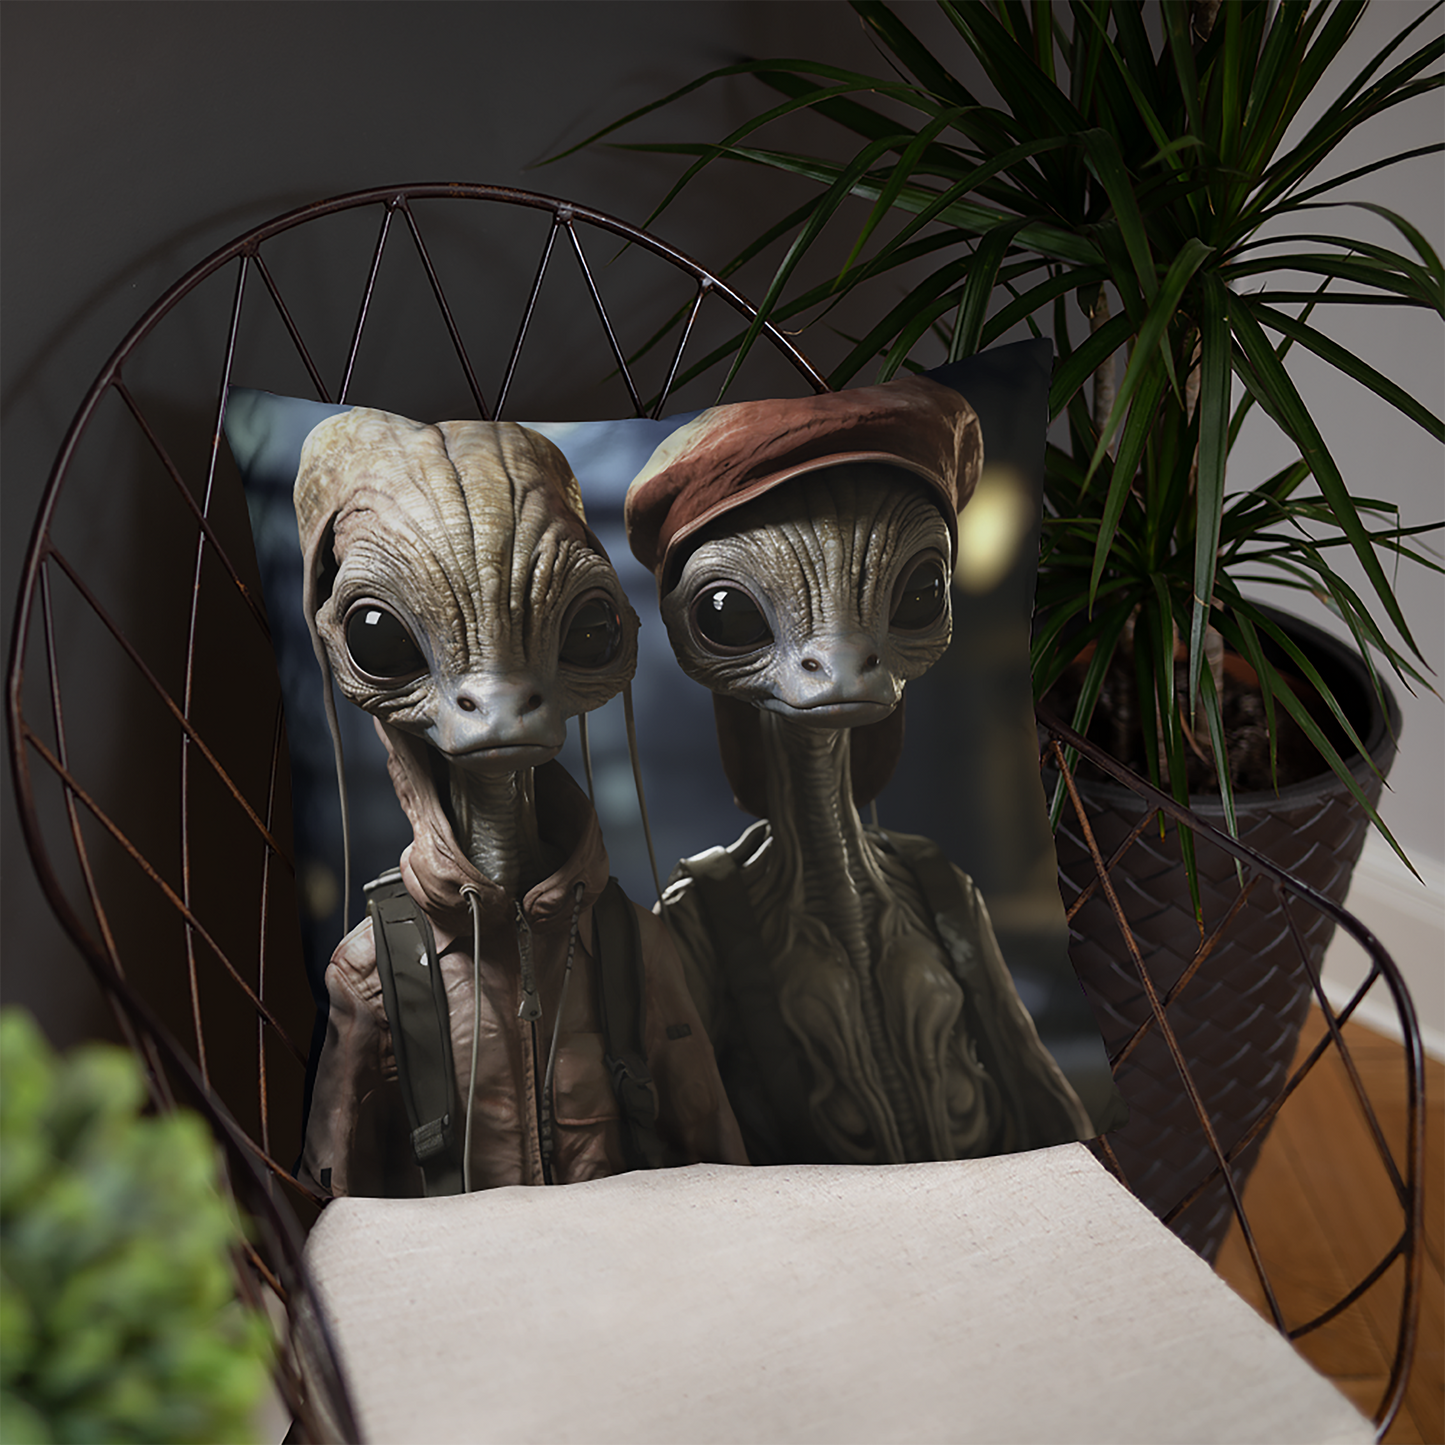 Space Throw Pillow Aliens in Red Caps and Coats Polyester Decorative Cushion 18x18